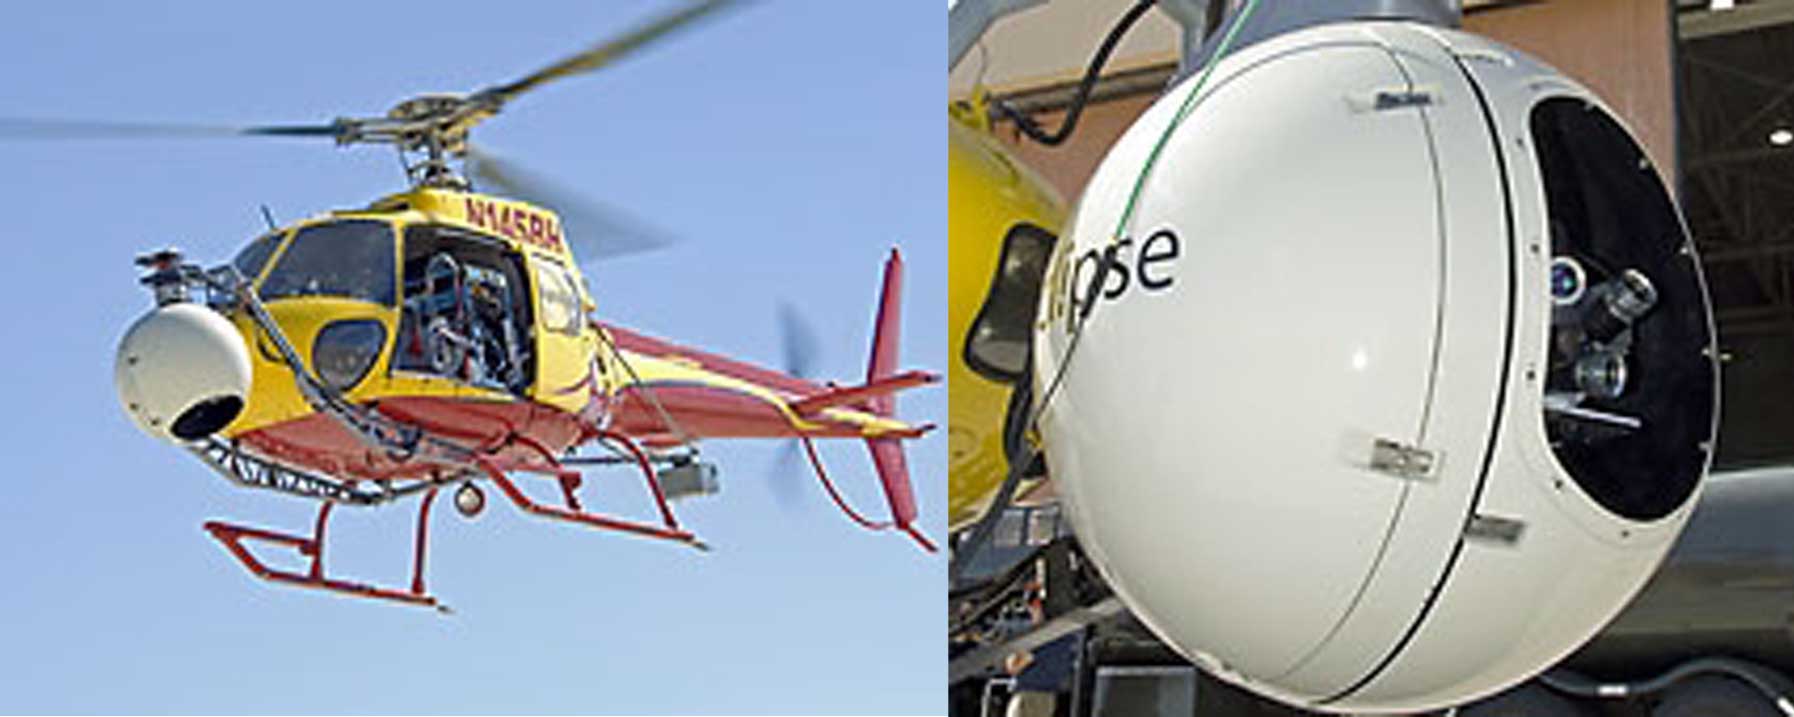 On the left, A sophisticated lidar device designed to detect potential landing site hazards for future autonomous lunar landers projects from the nose of a helicopter during August flight tests at NASA Dryden. A variety of lenses used by the gimbal-mounted lidar device are visible through the opening in its ball-shaped housing o the right.